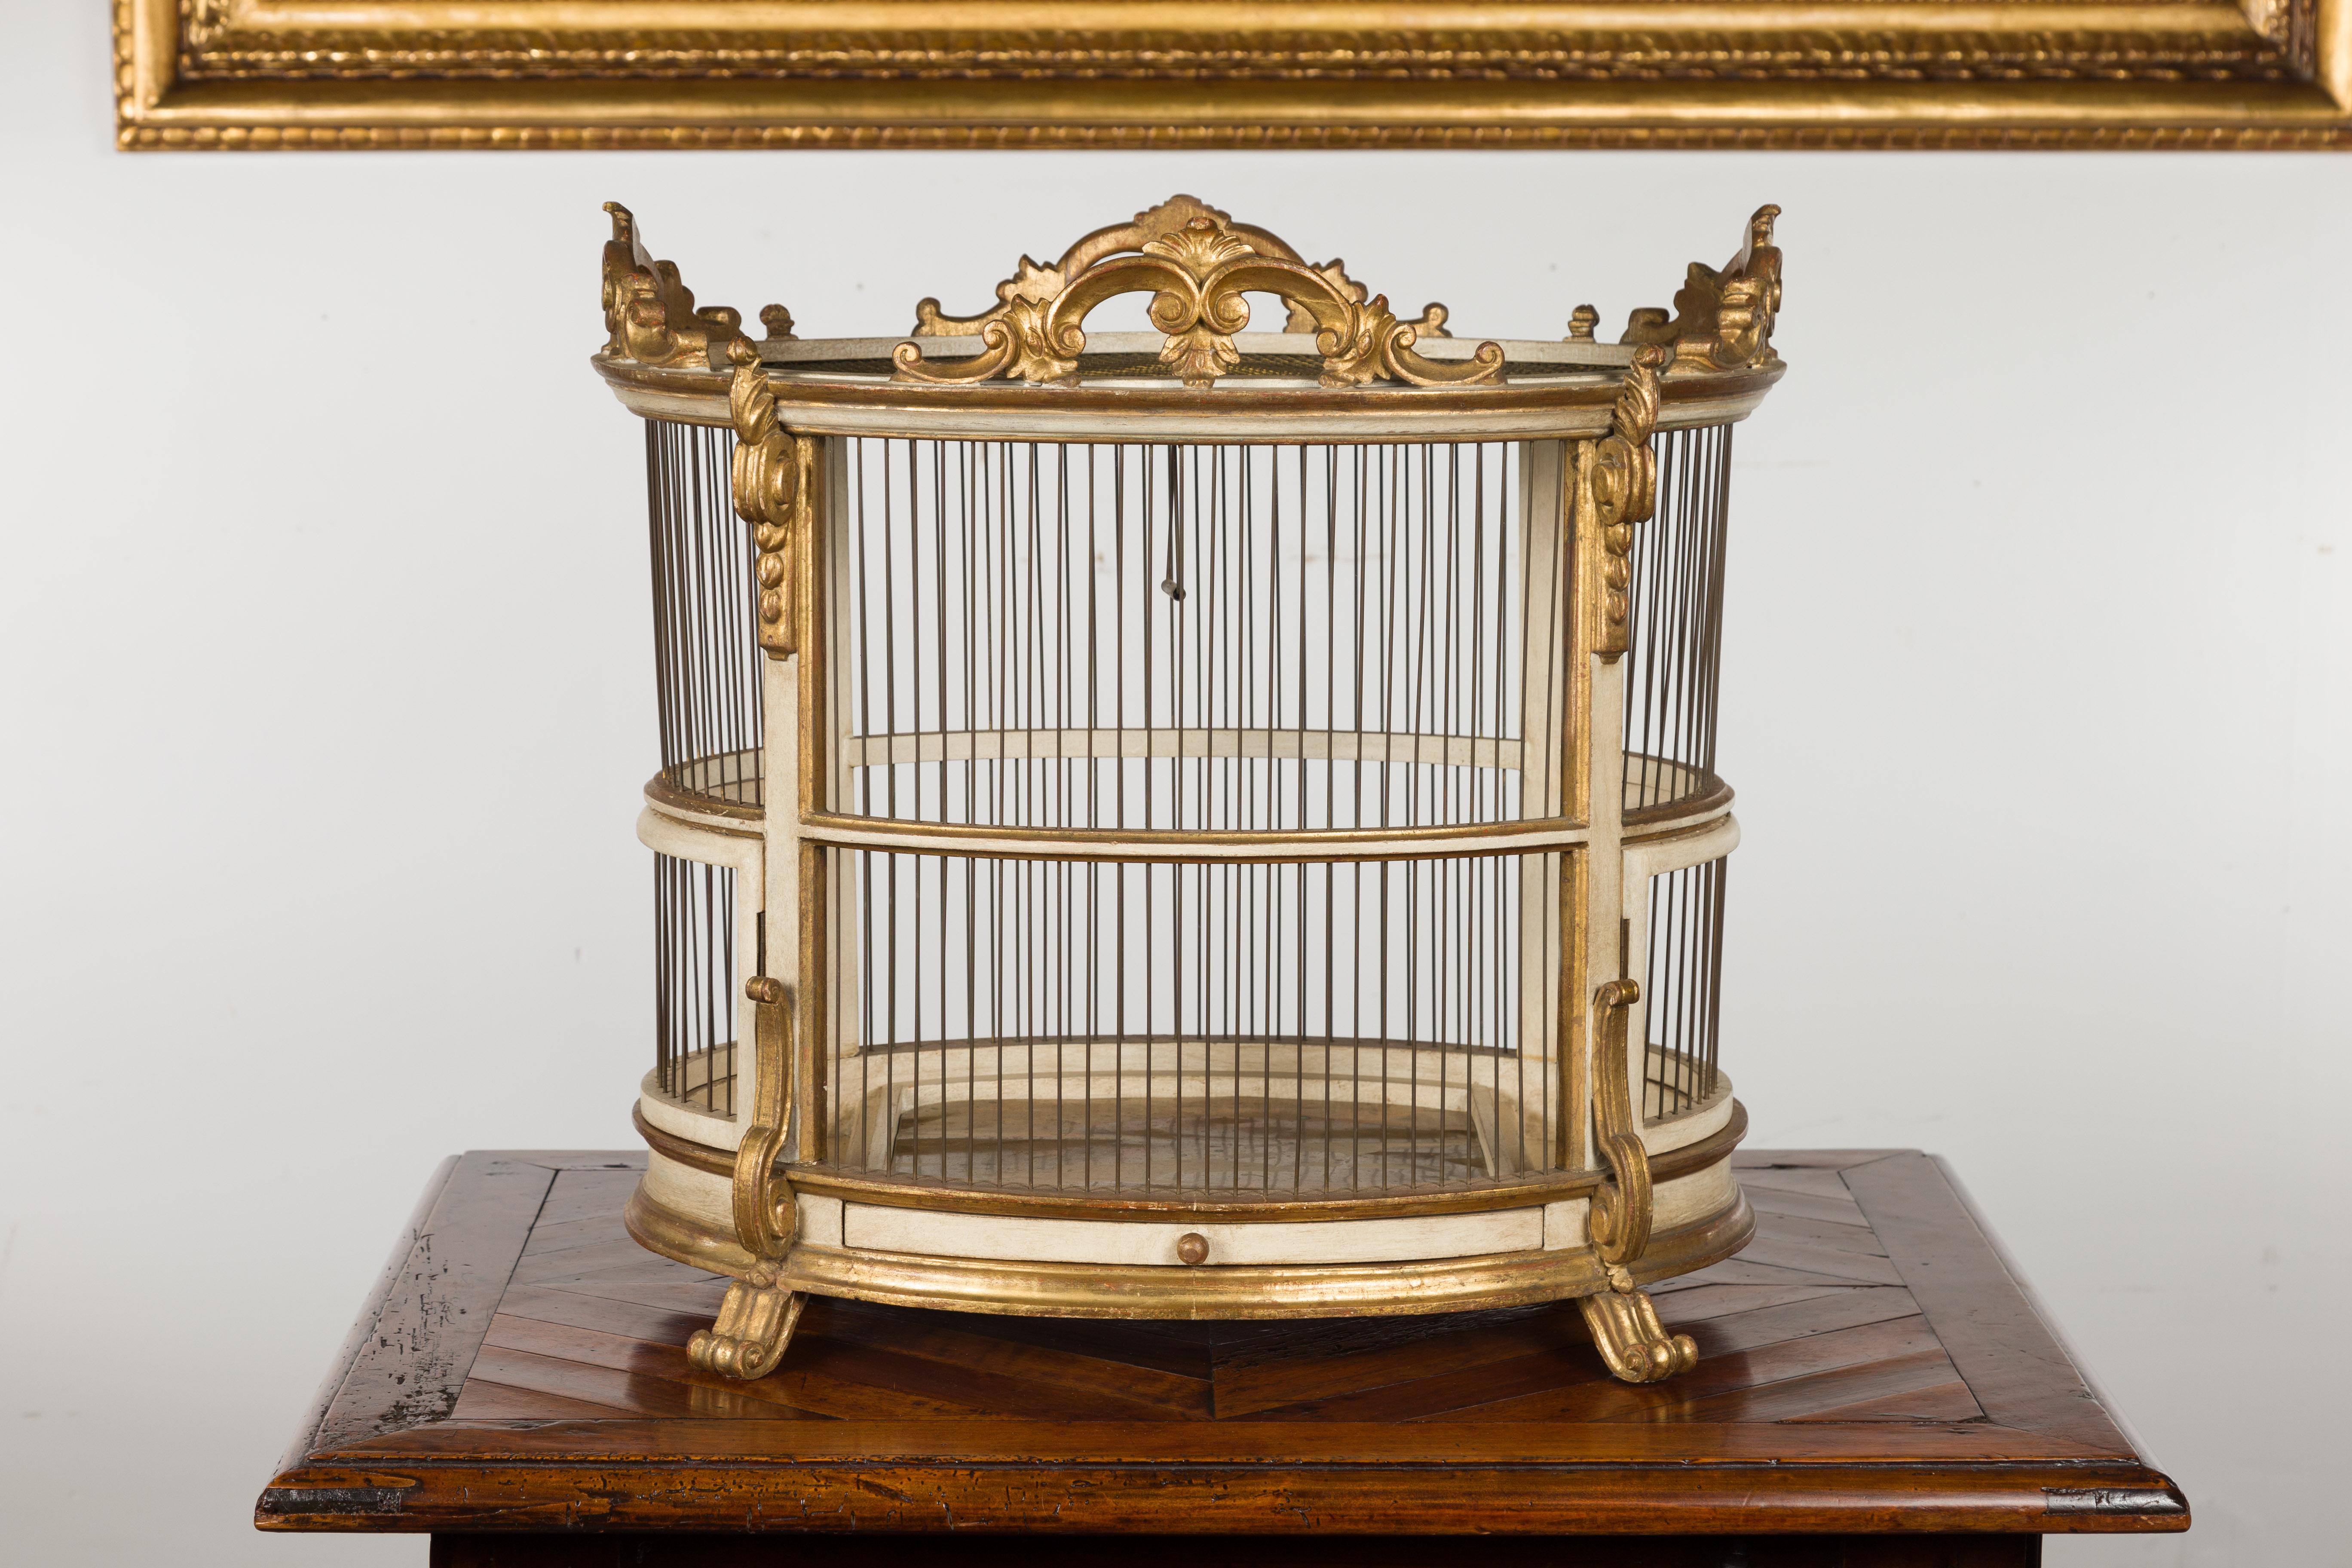 An Italian Rococo style birdcage from the mid-20th century, with gilt and painted accents. Created in Italy during the second quarter of the 20th century, this elegant oval birdcage charms us with its painted and gilt finish, perfectly complimenting